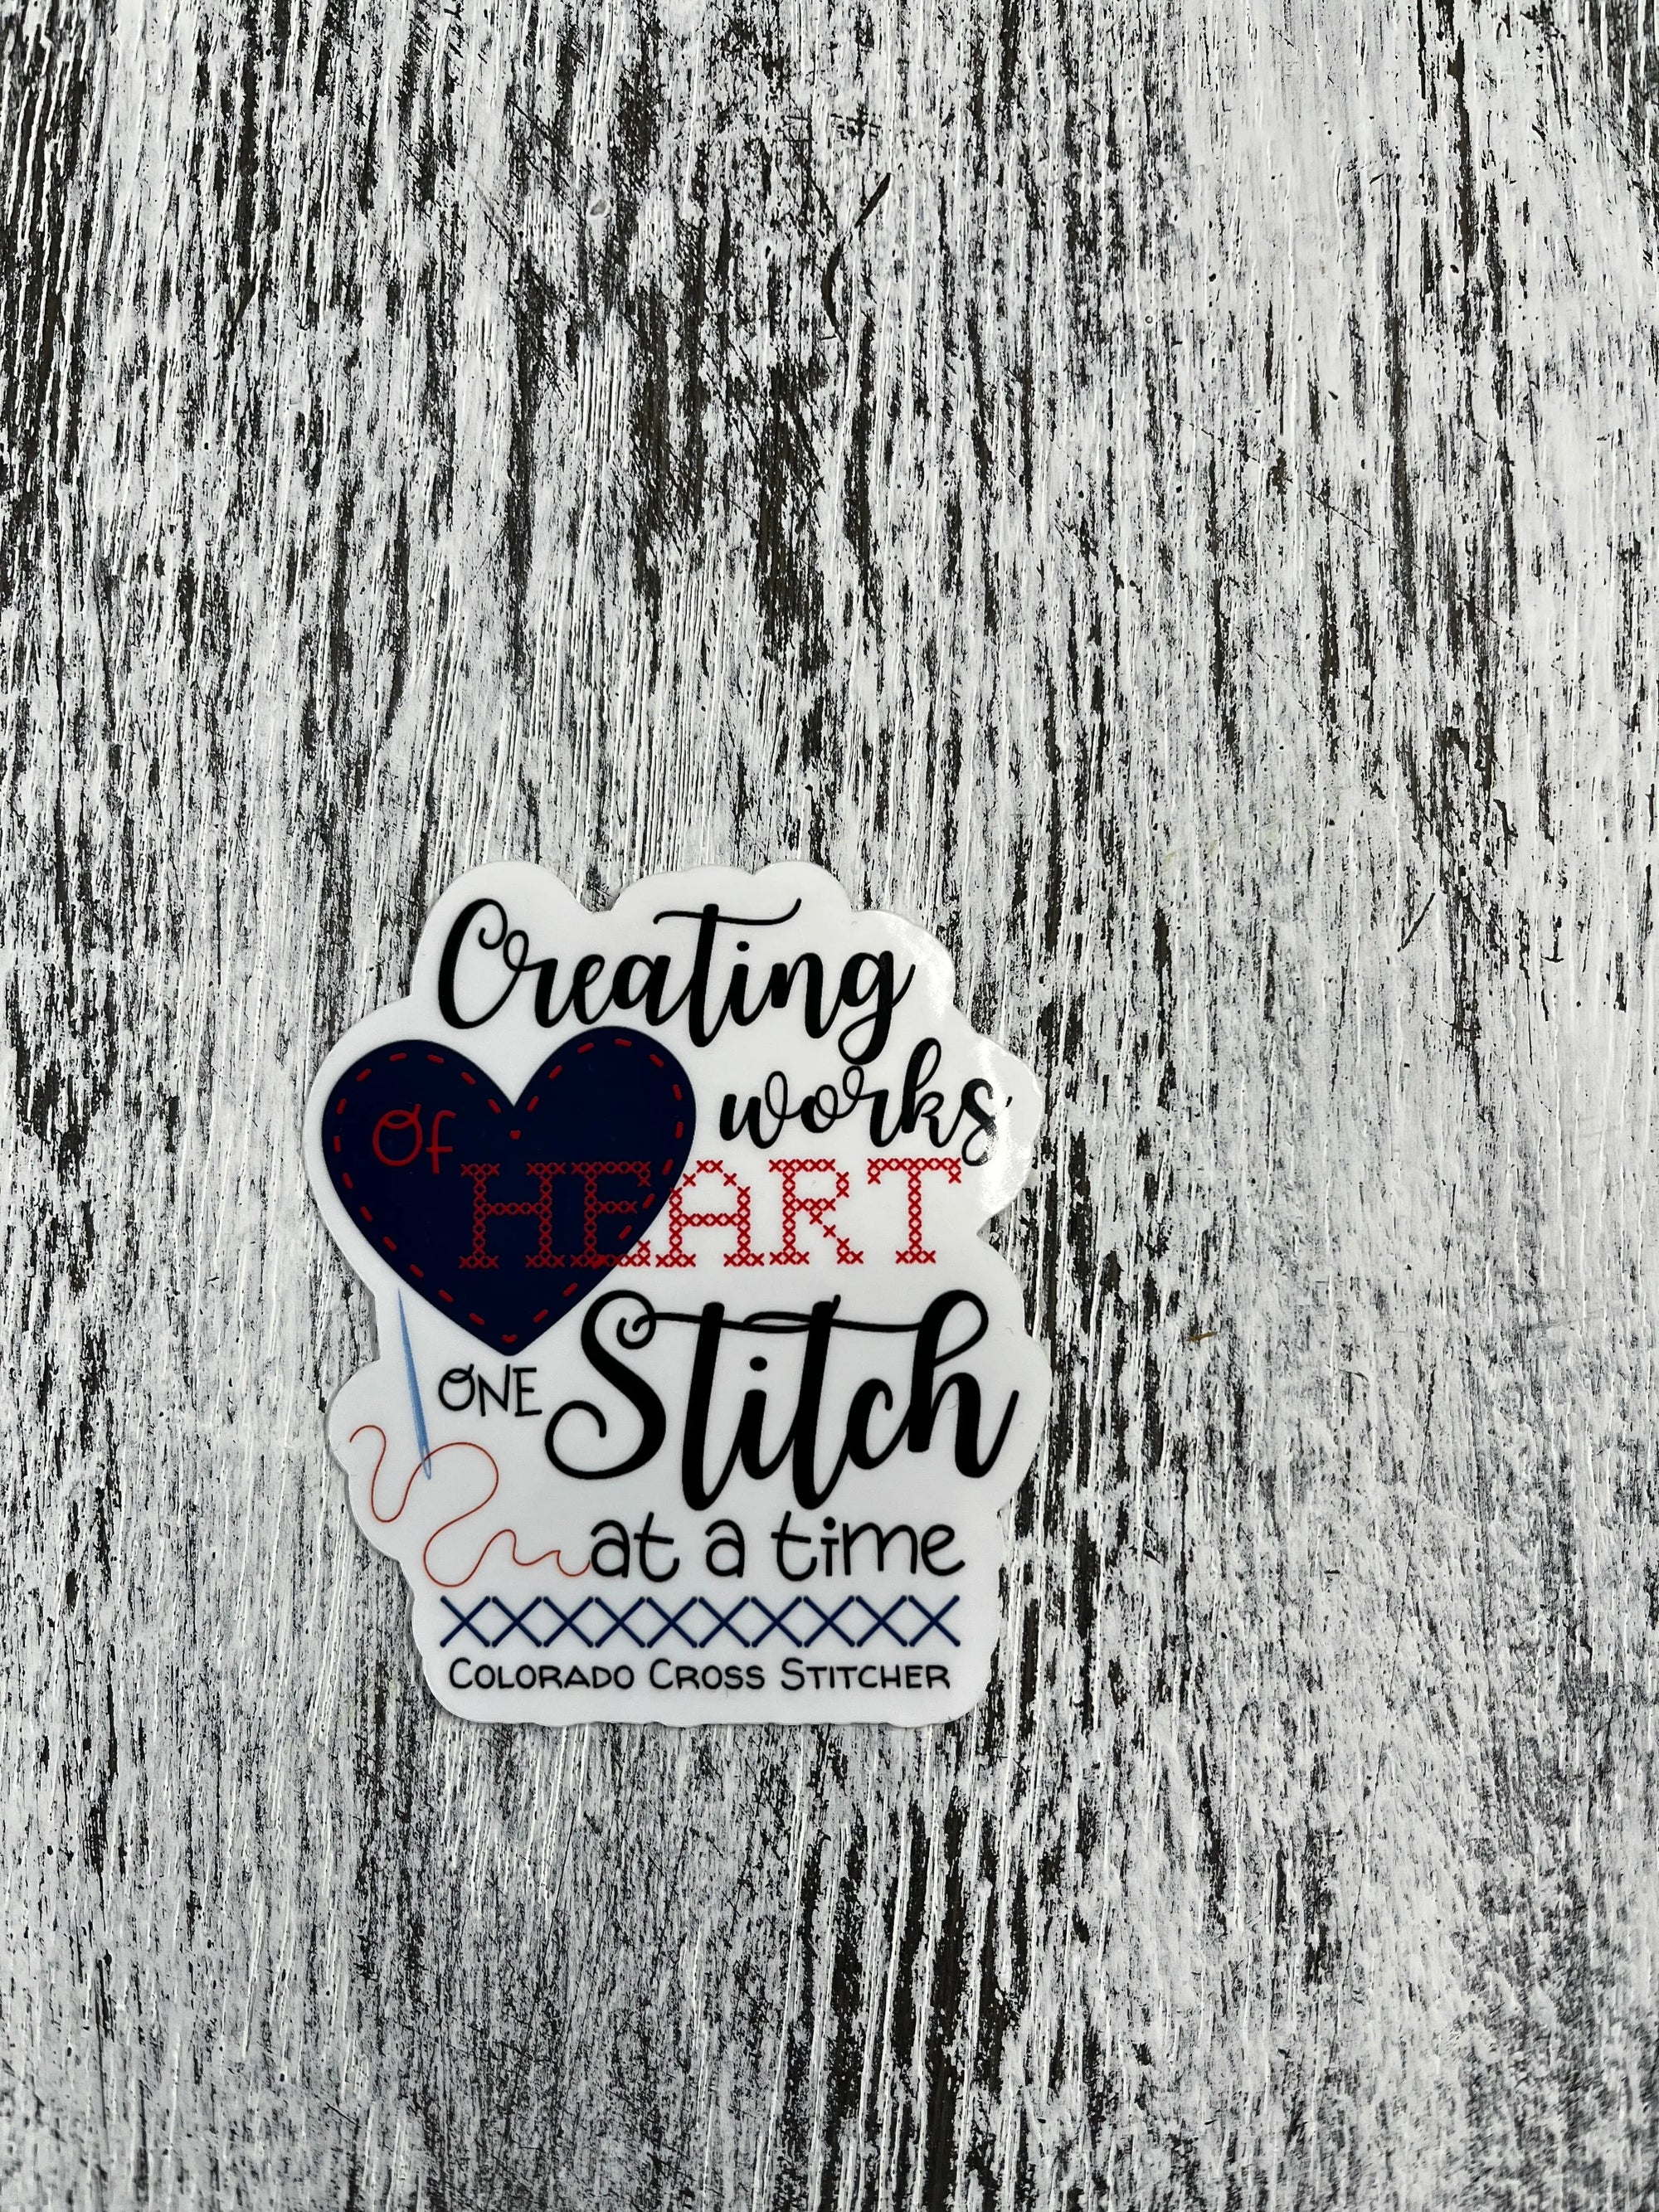 Sticker - Creating Works of Heart One Stitch at a Time Colorado Cross Stitcher